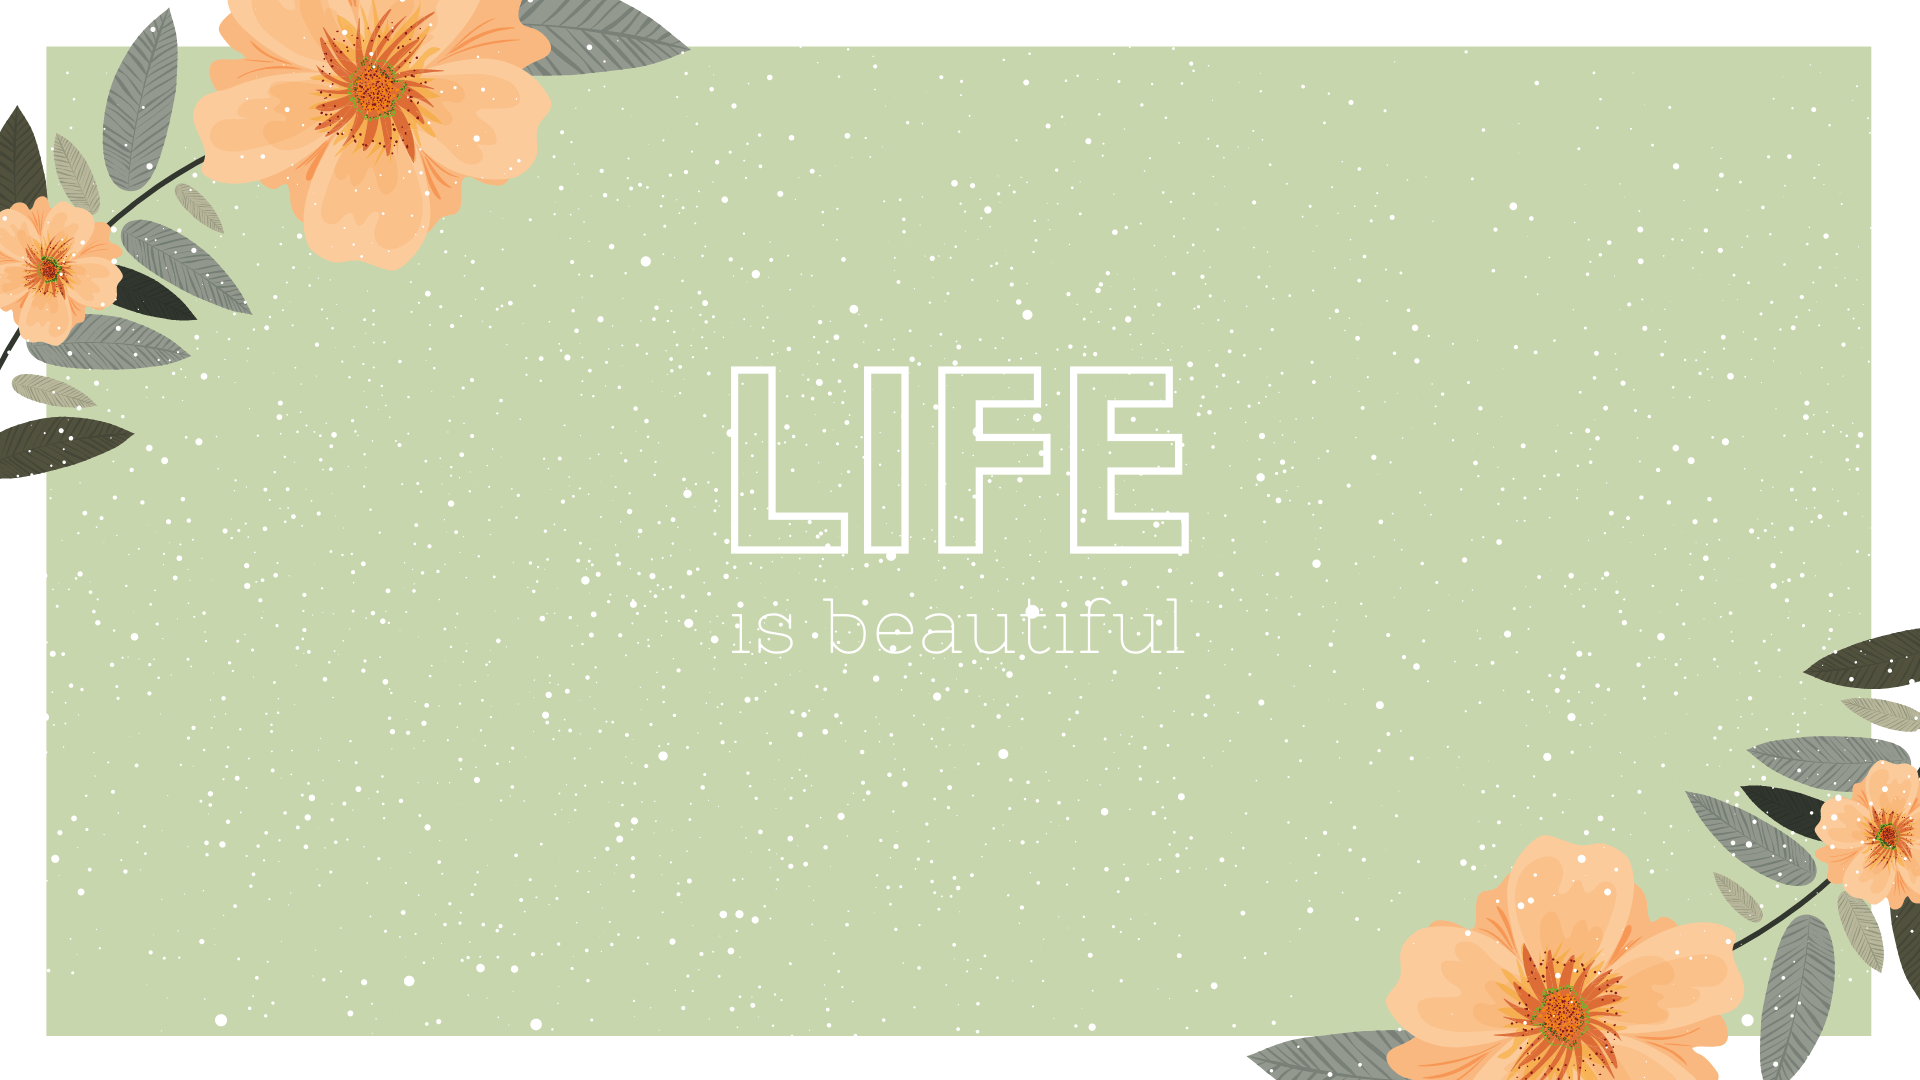 Gorgeous FREE Inspirational Desktop Background (Download Now!)